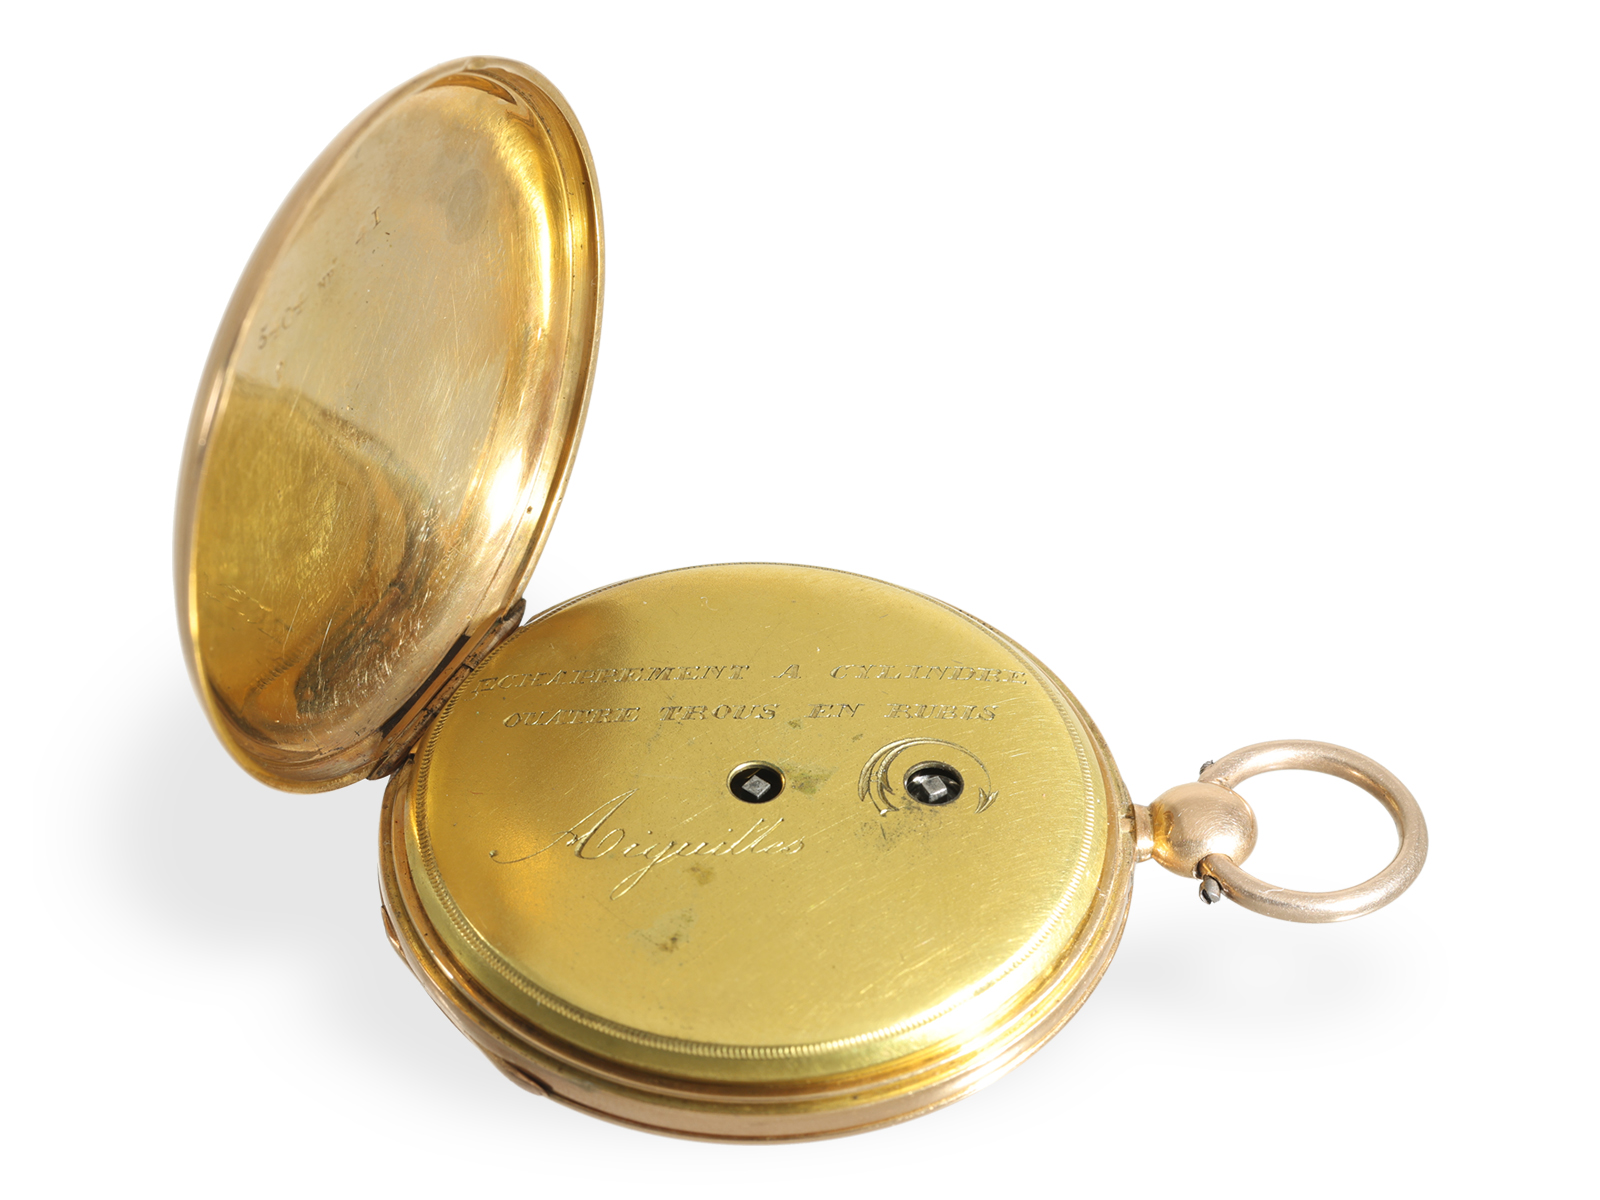 Pocket watch: pink gold lepine in very good condition, ca. 1840 - Image 3 of 4